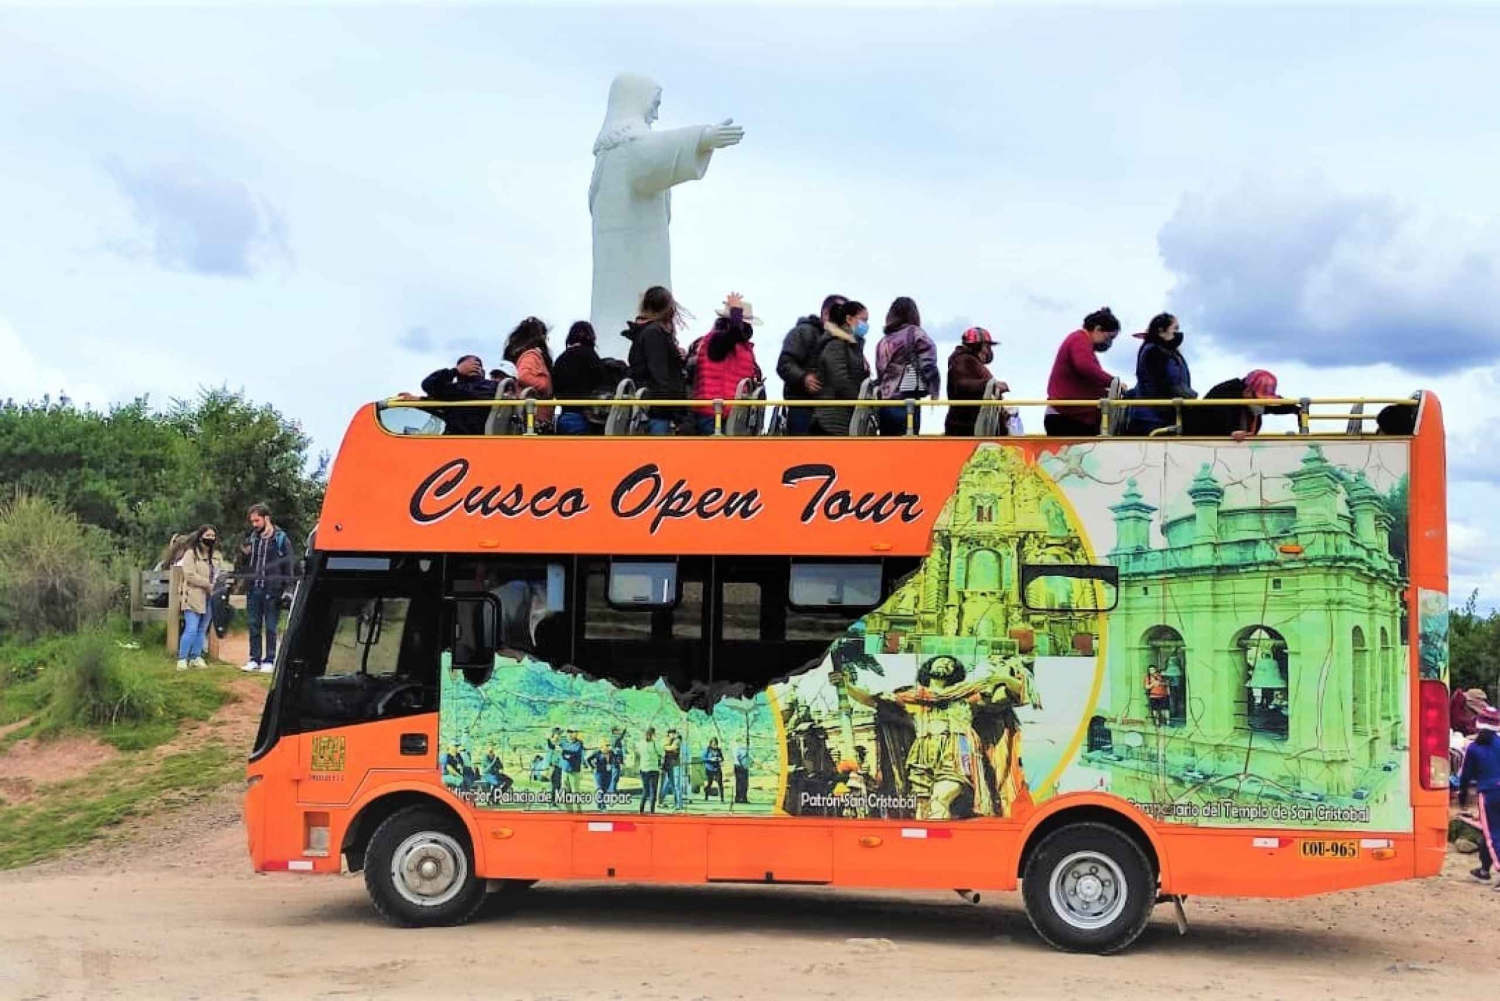 Cusco: Sightseeing Tour of the City on an Open-Top Bus